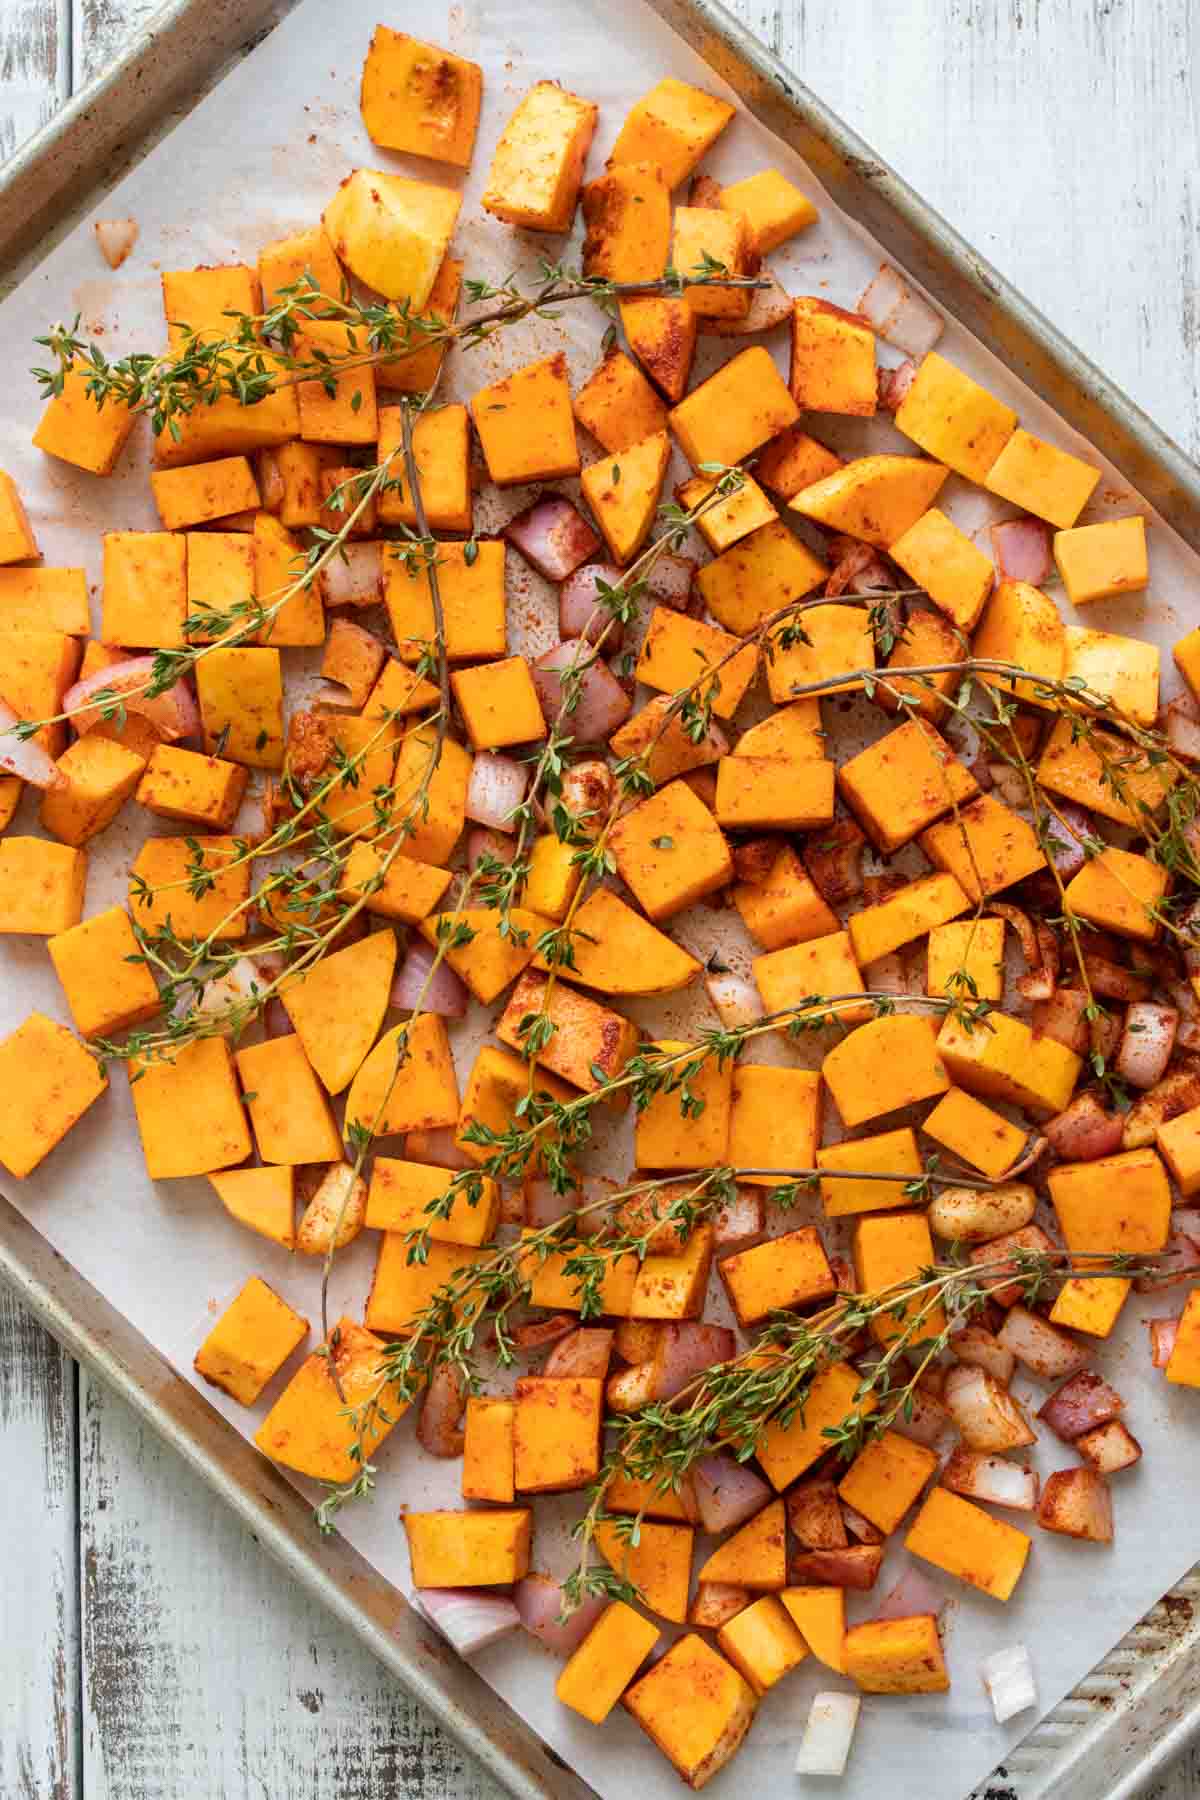 Chopped butternut squash and shallots with sprigs of thyme on a parchment lined baking sheet.